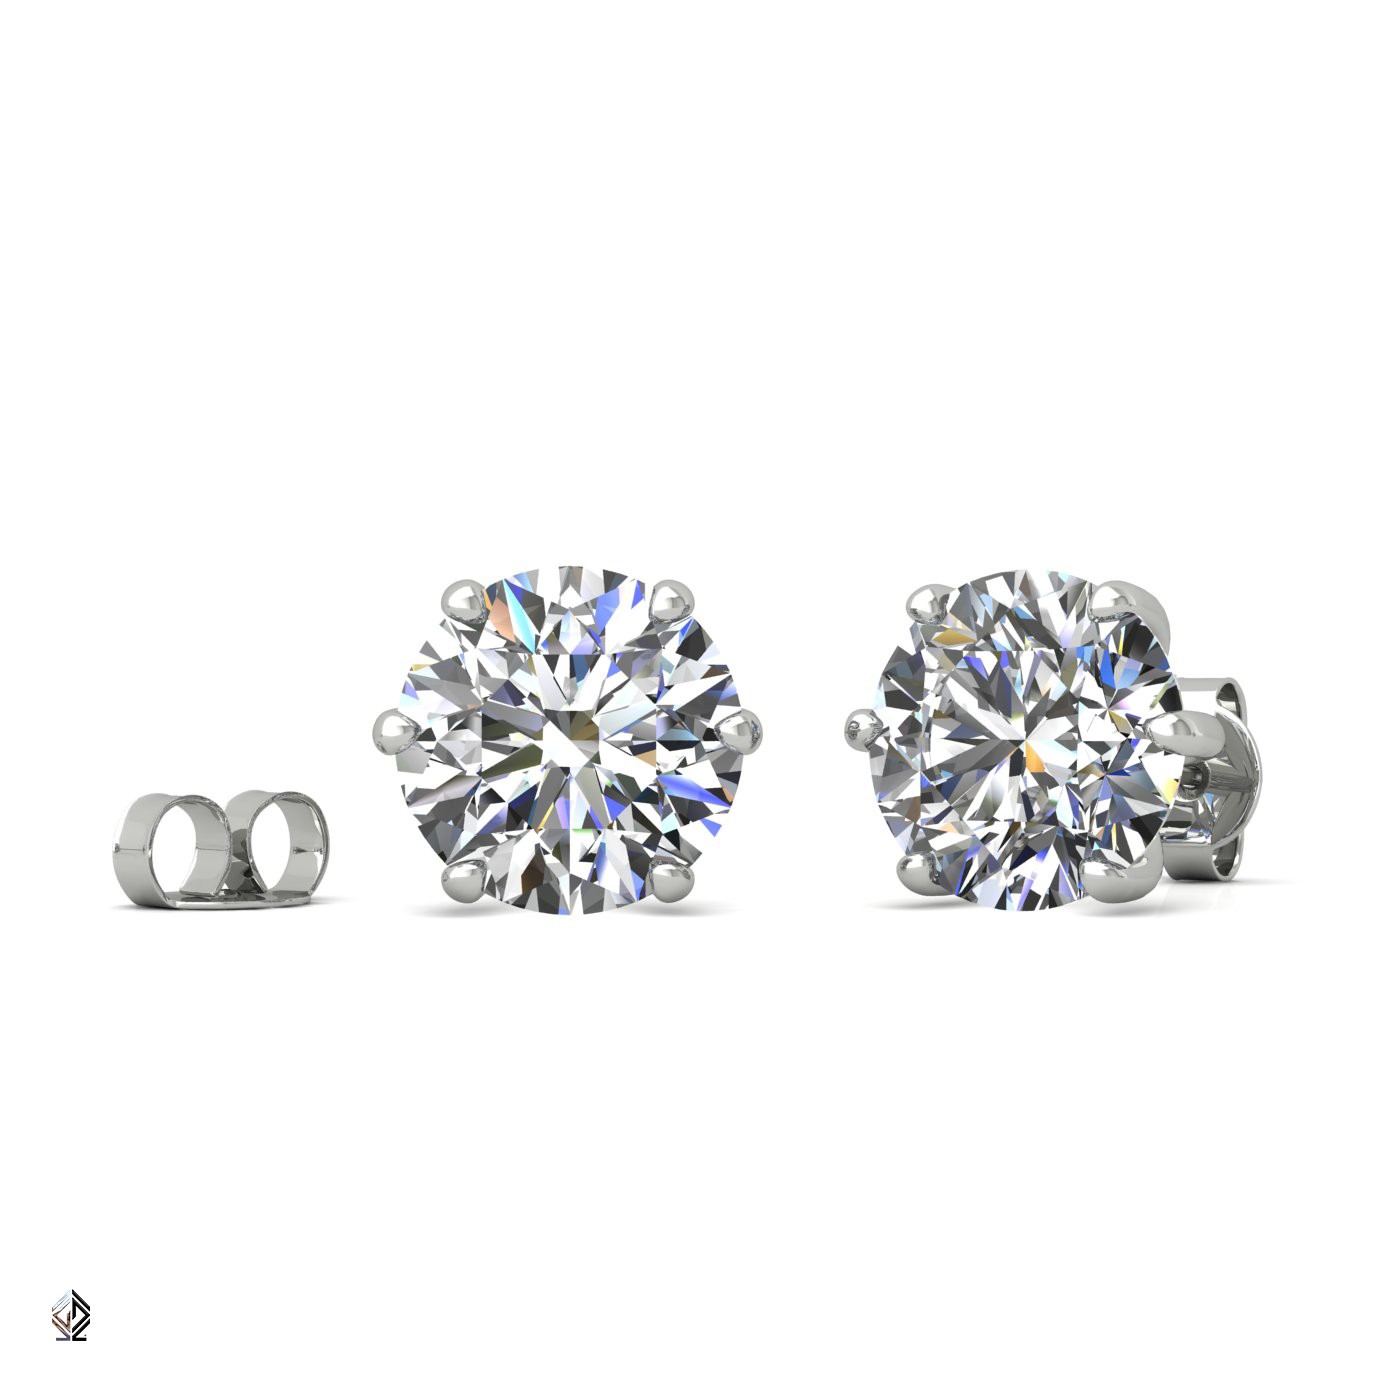 18k white gold 0,5 ct each (1,0 tcw) 6 prongs round shape diamond earrings Photos & images